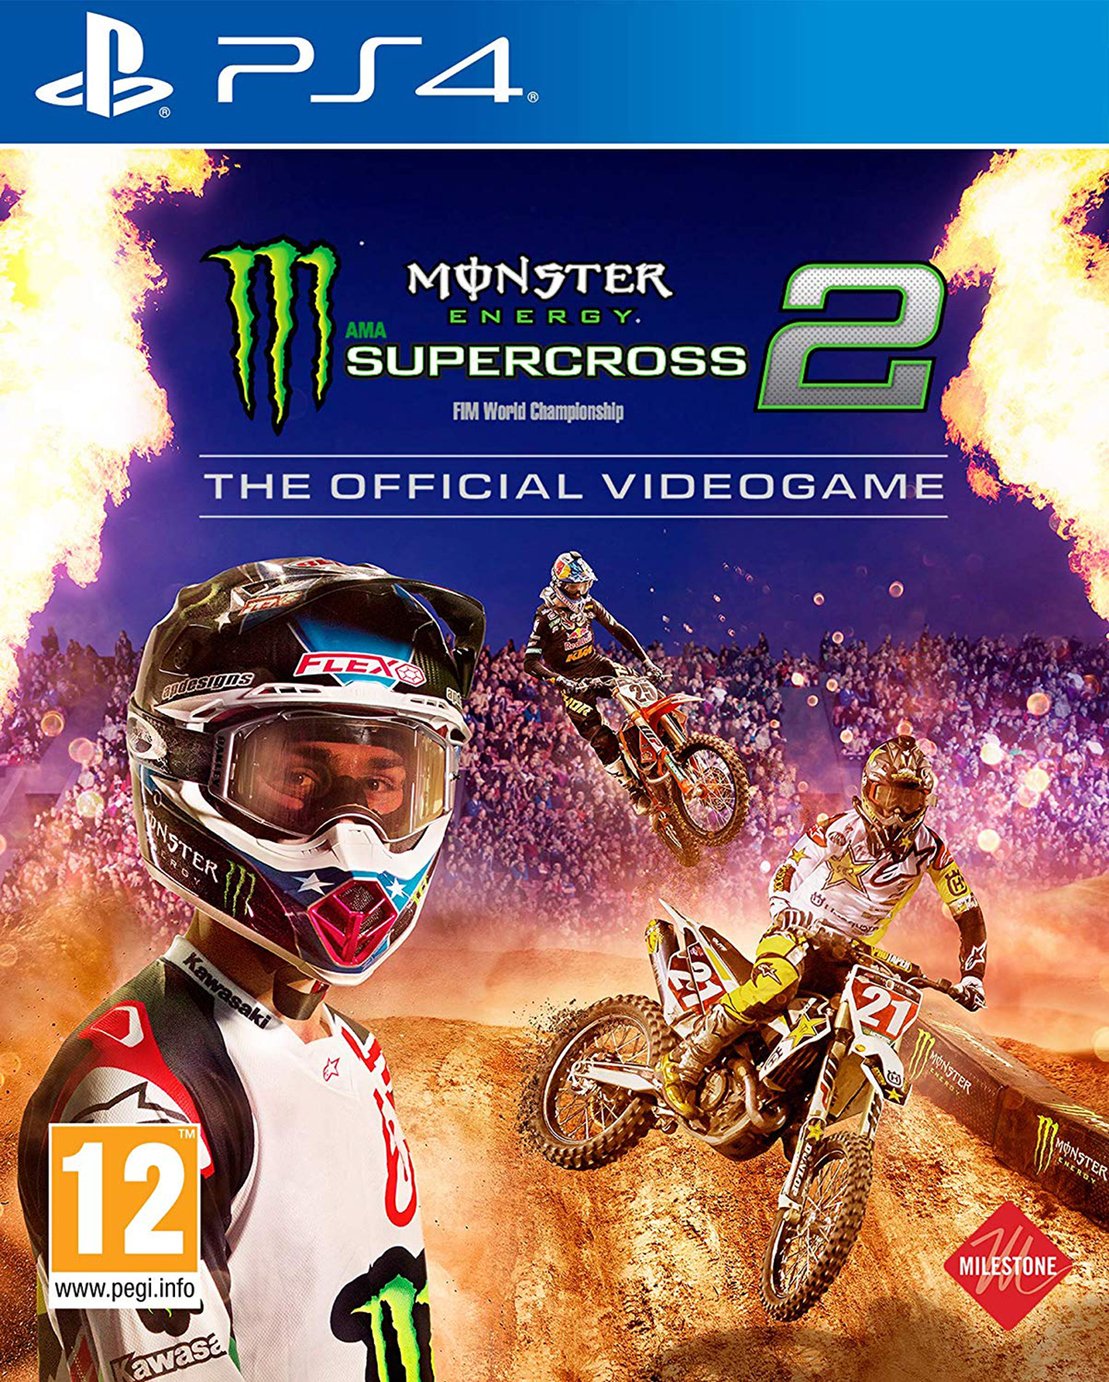 Monster Energy Supercross 2 PS4 Game review